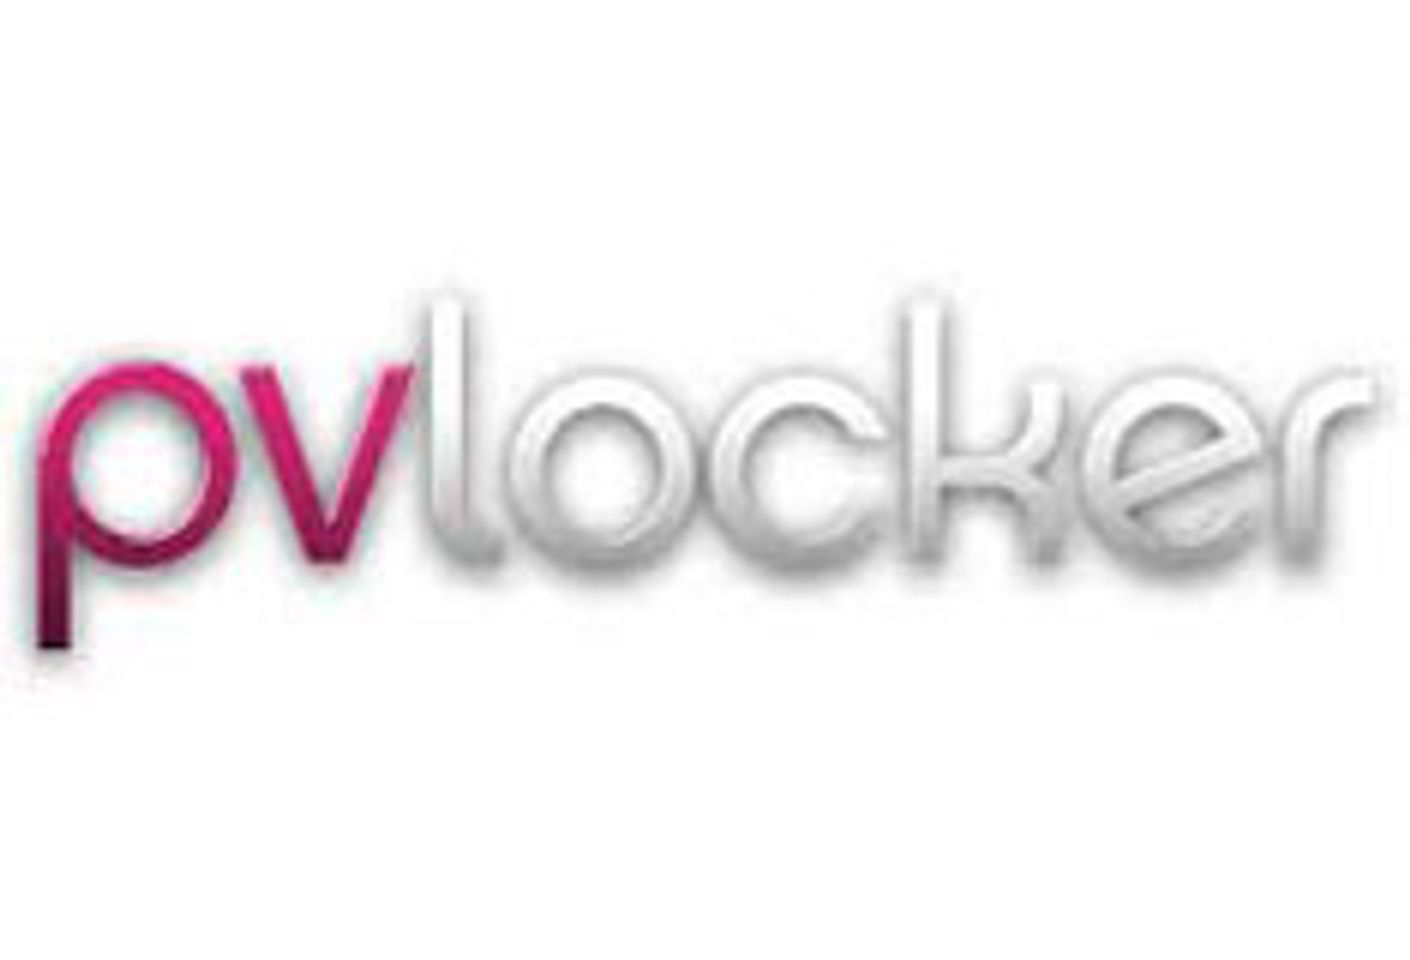 PVLocker Adds Rental Feature, Celebrates with Mother’s Day MILF Promo